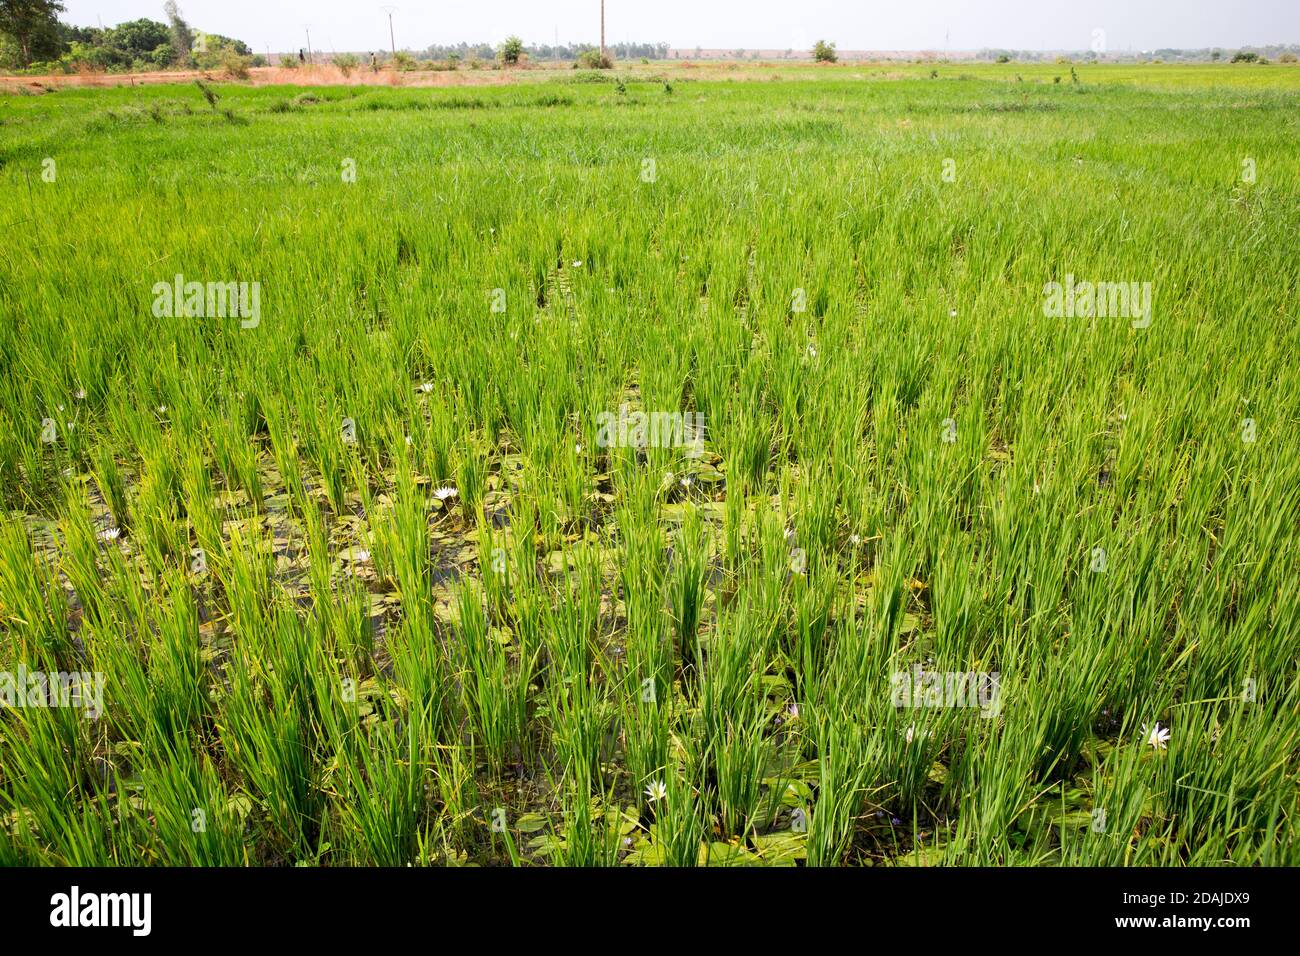 Selingue, Mali, 26th April 2015; Irrigated rice ripening. Normally one  hectare of rice requires 4 sacks of NPK and 4 sacks of Uree fertilizer.  This costs 100,000 CFA per hectare. From Selingue